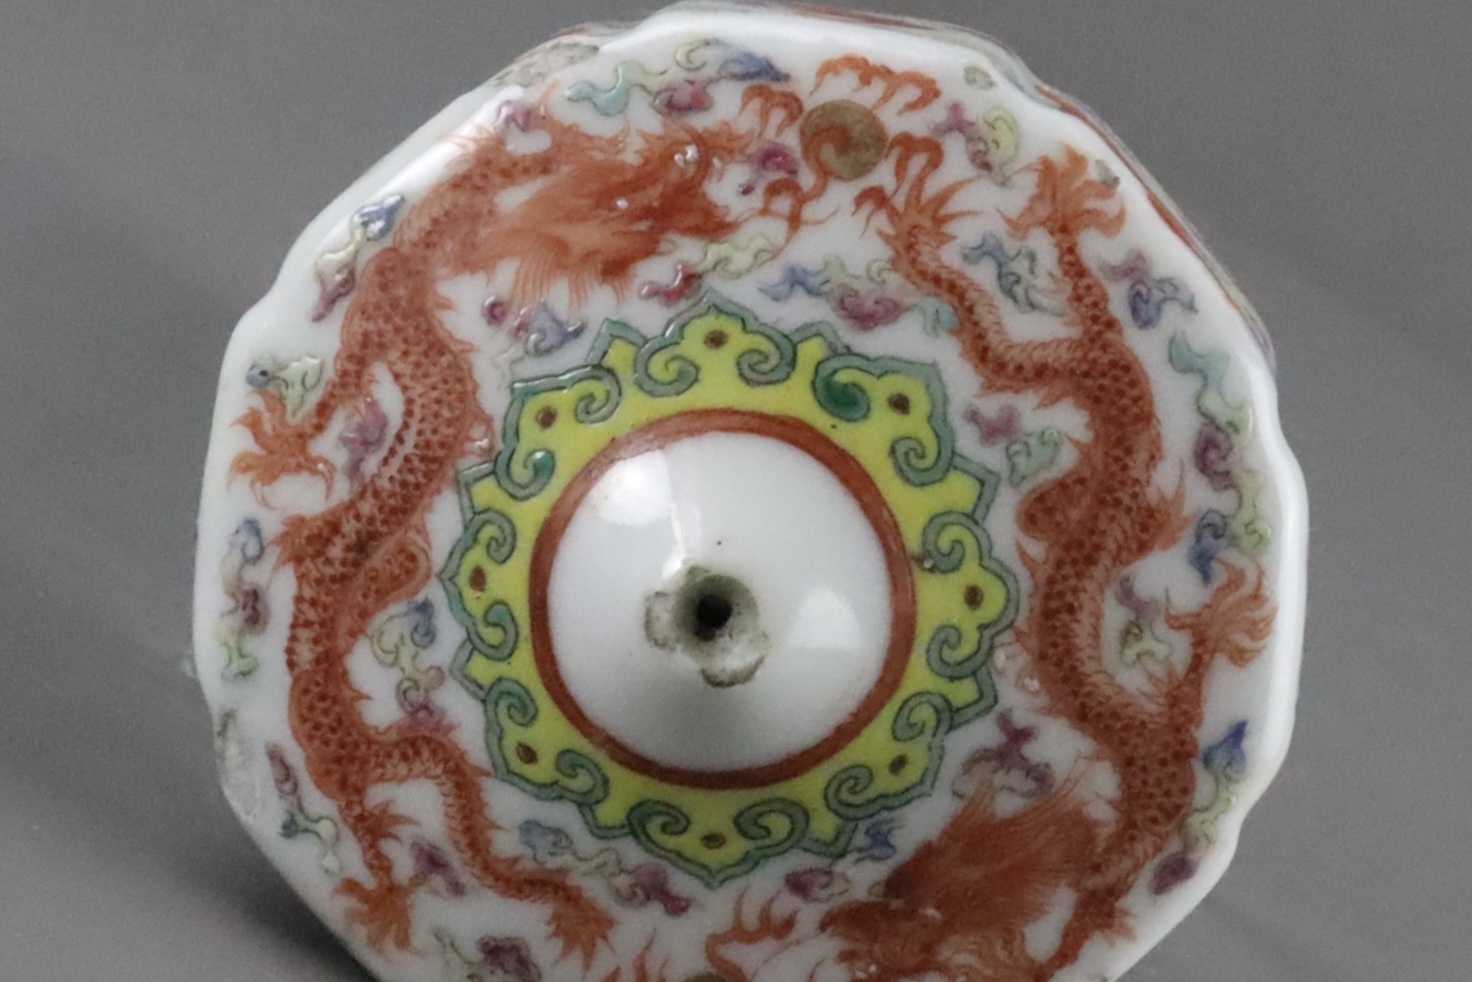 A Rare Porcelain Opium Pipe Bowl, four character mark, 19th century, - Image 5 of 8